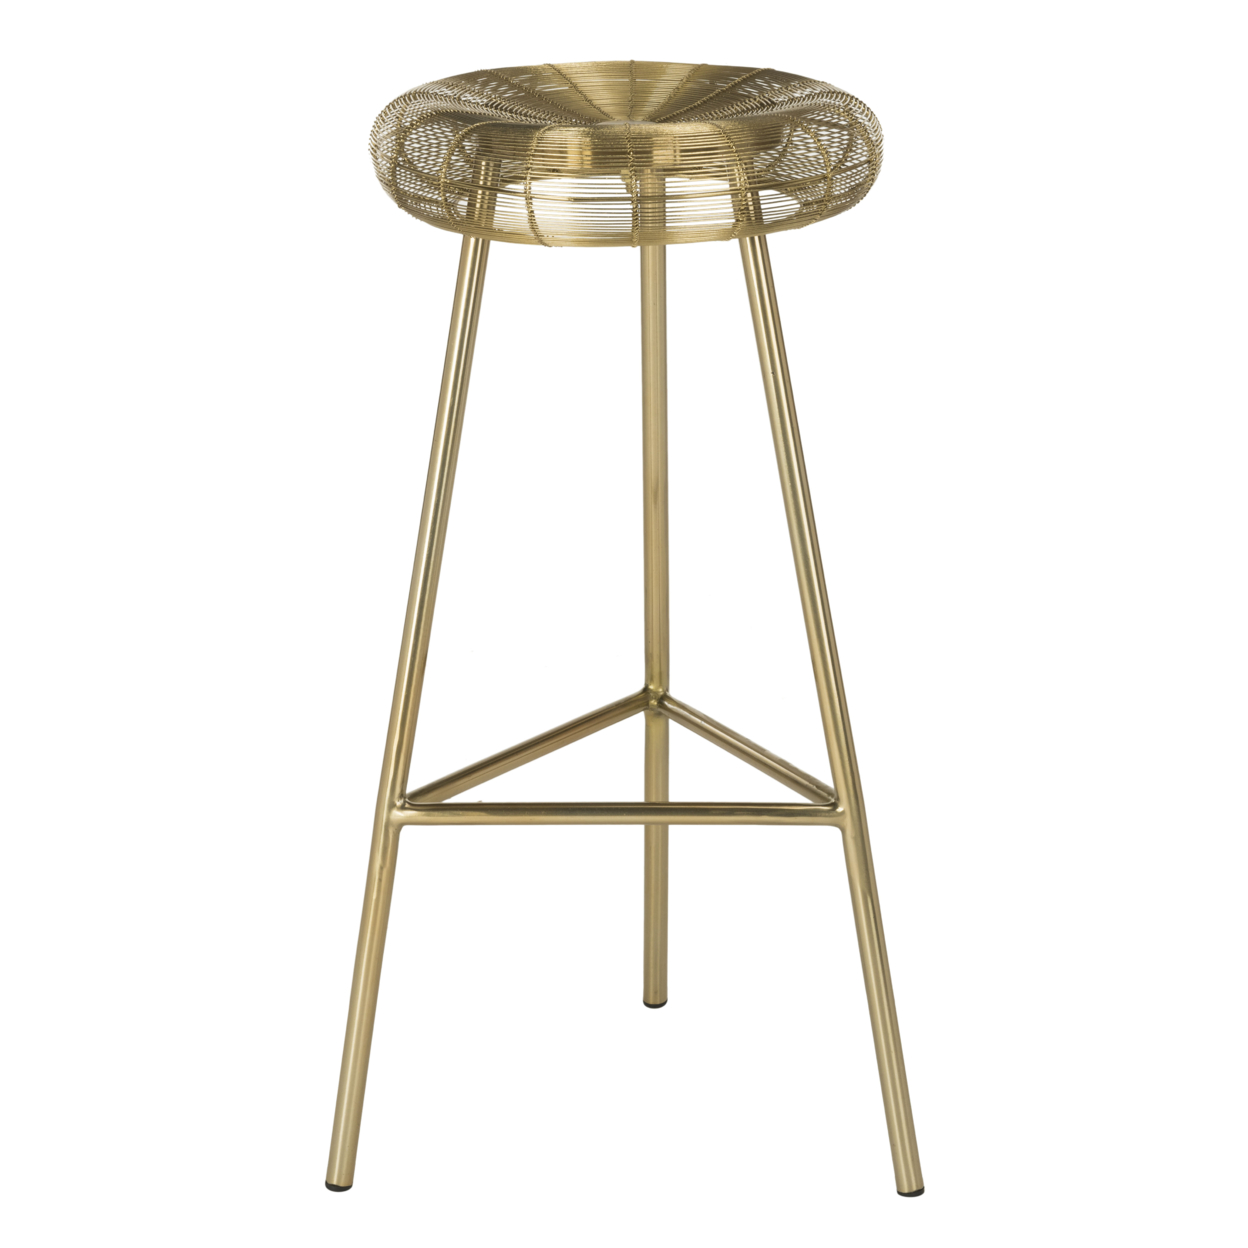 SAFAVIEH Addison Wire Weaved Contemporary Bar Stool Gold